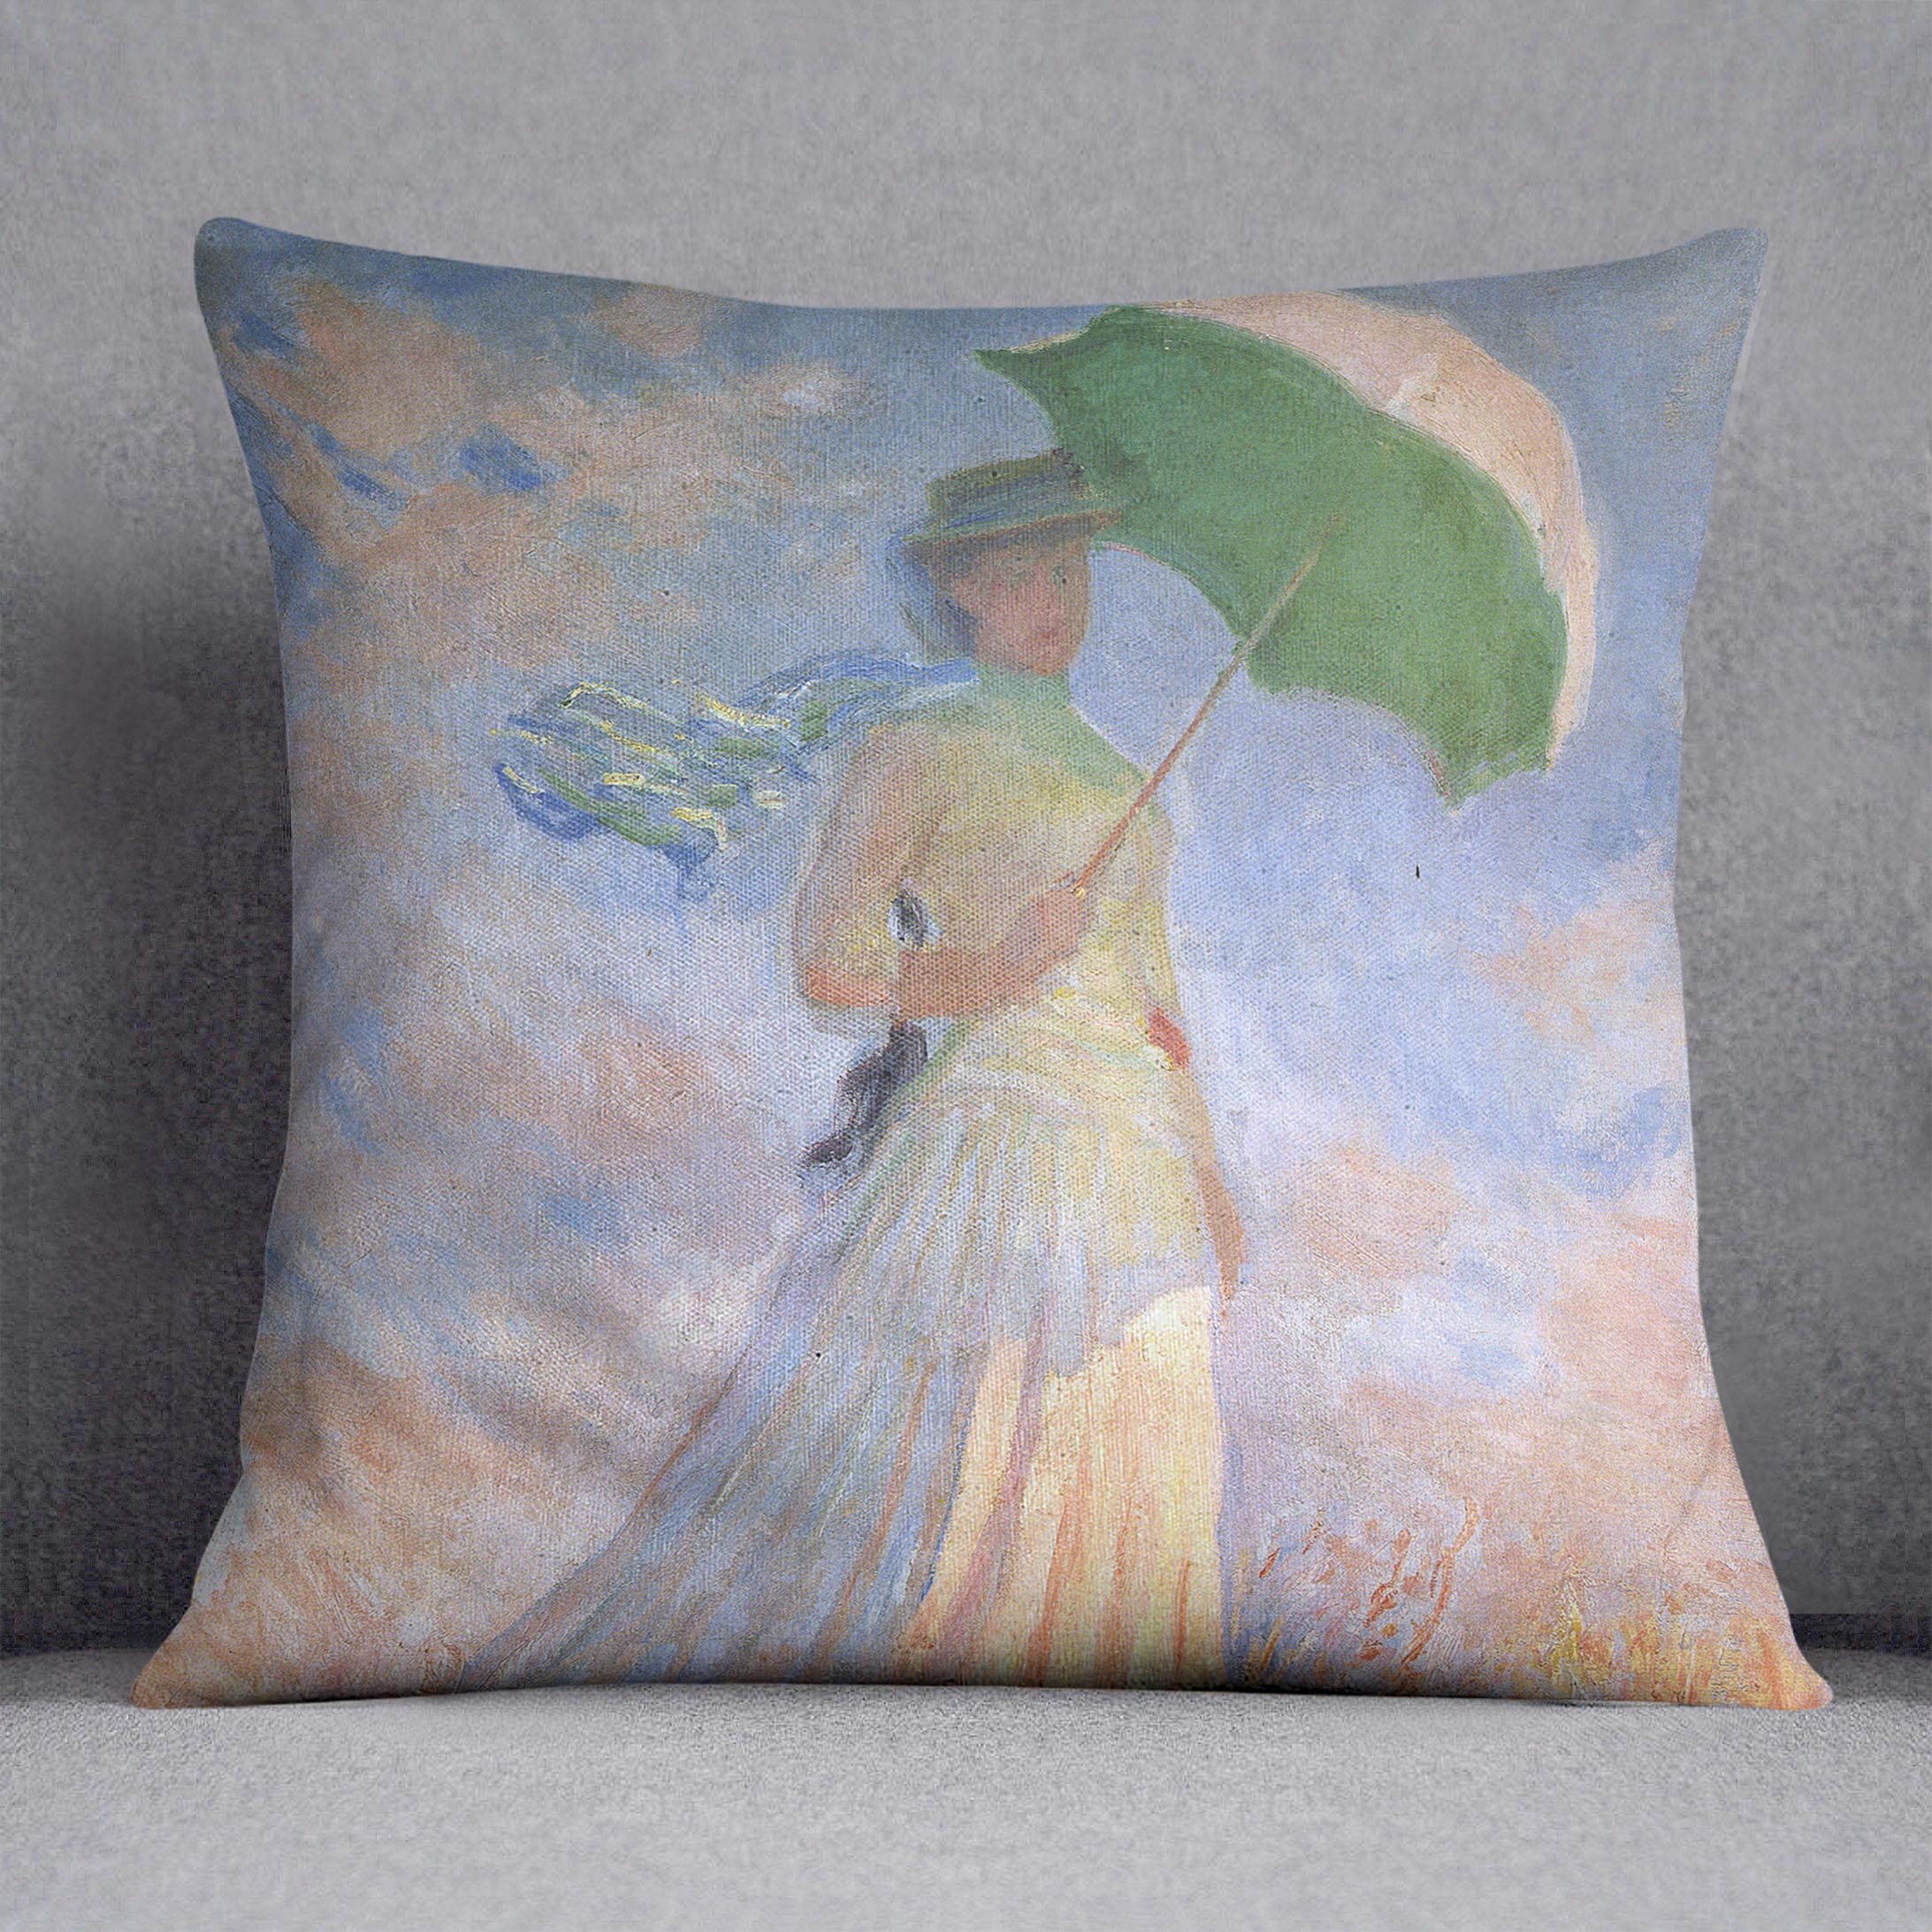 Woman with Parasol 2 by Monet Cushion